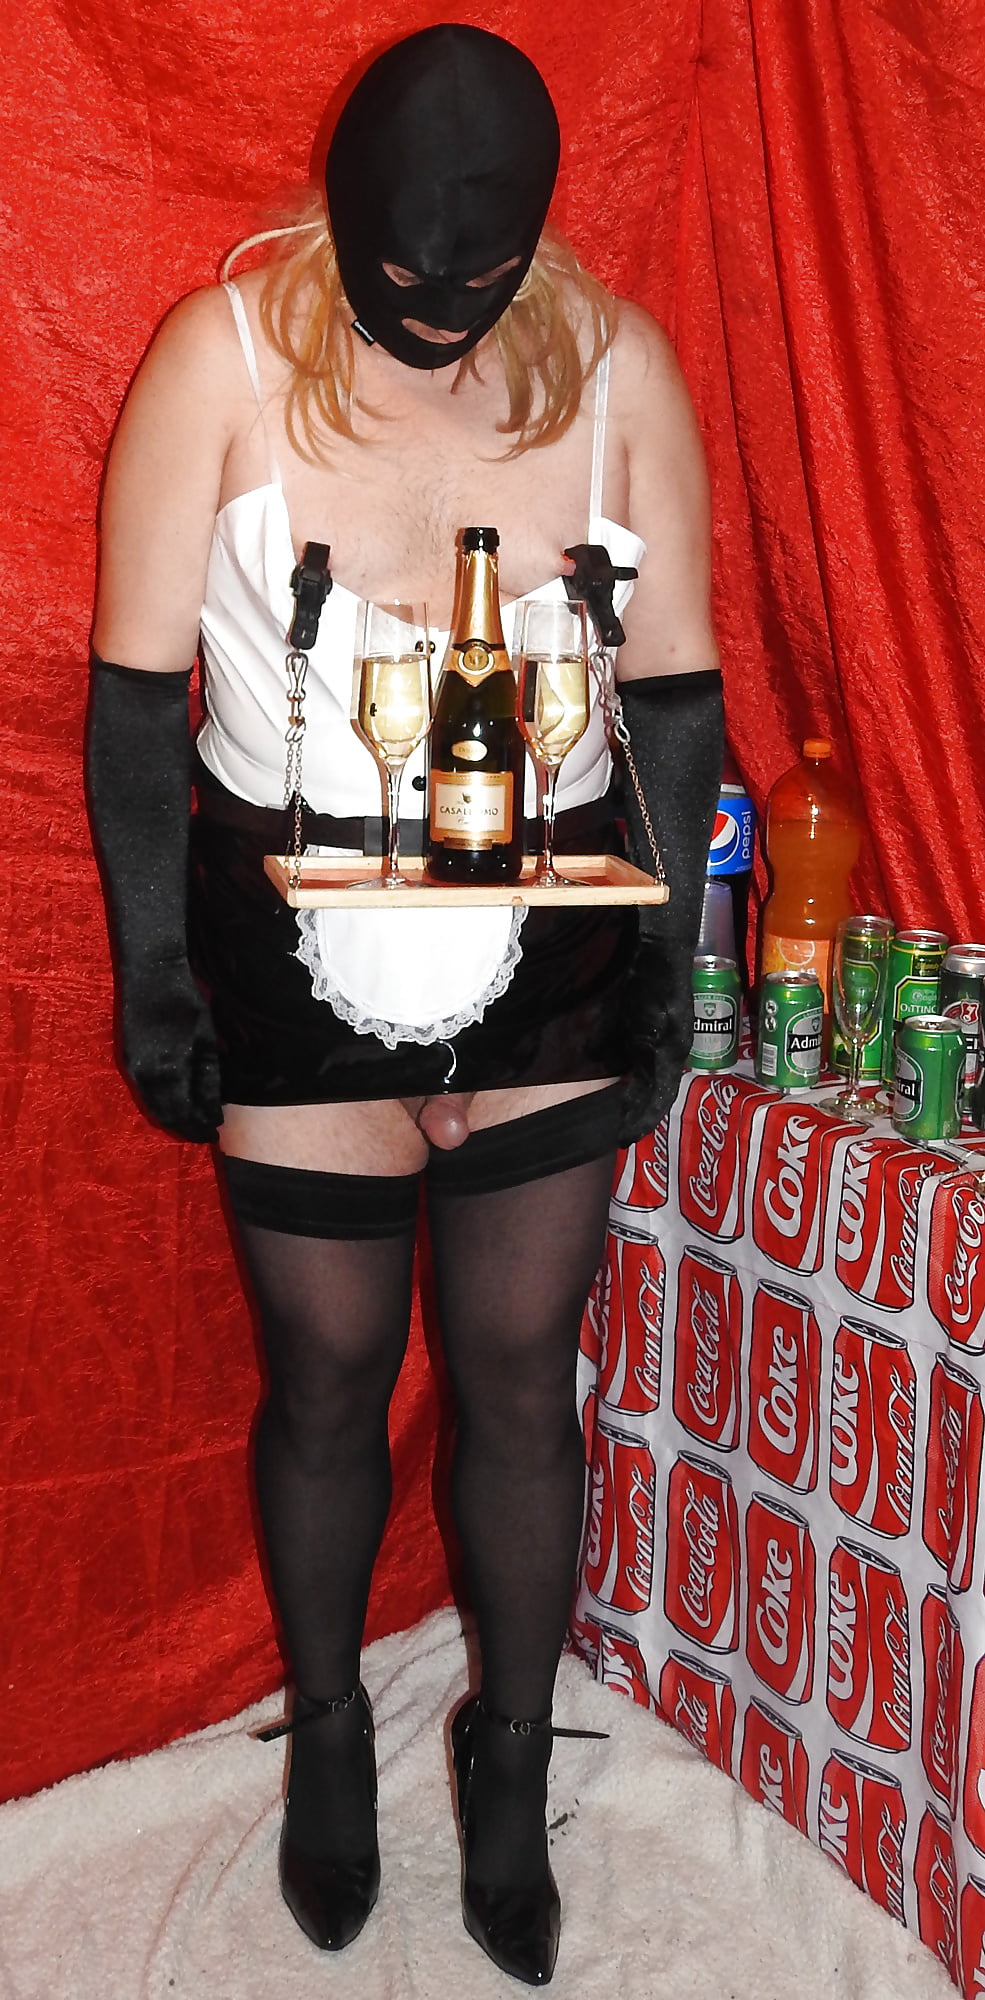 SissyBitch Served in the Bar #107105443